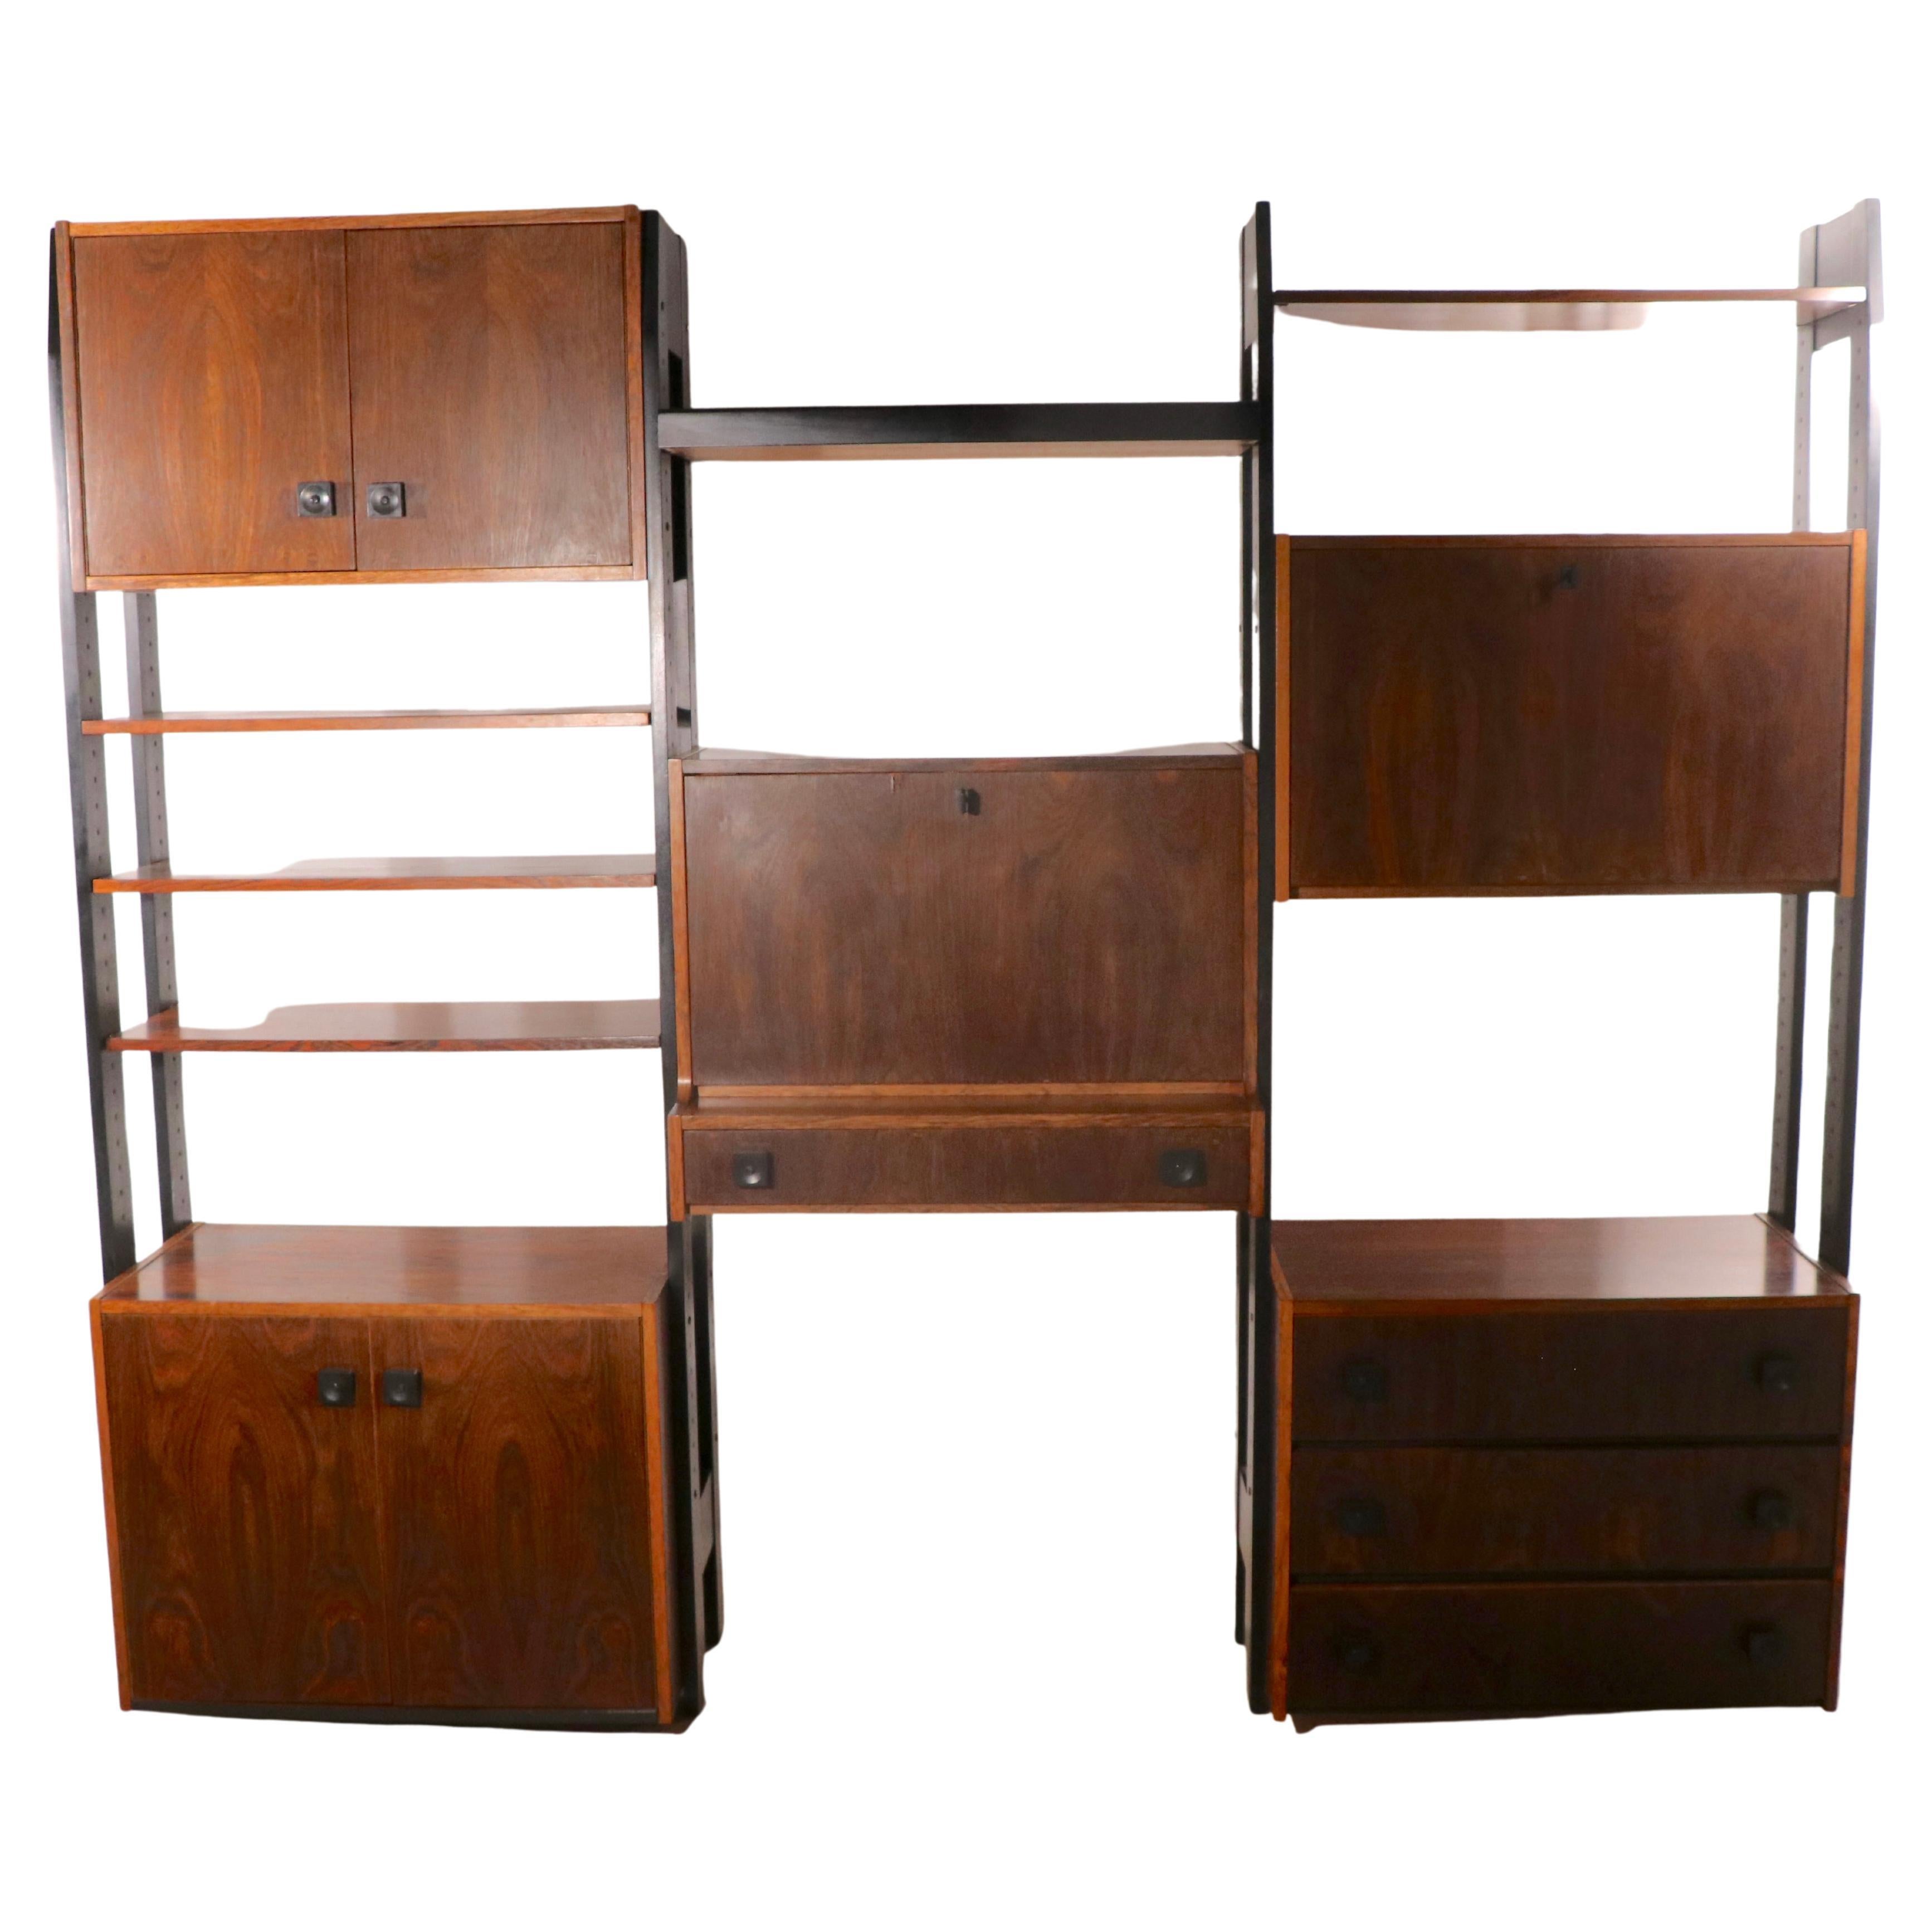 Danish Mod Century Freestanding Wall Unit in Rosewood After Cado Ca 1950/1960's